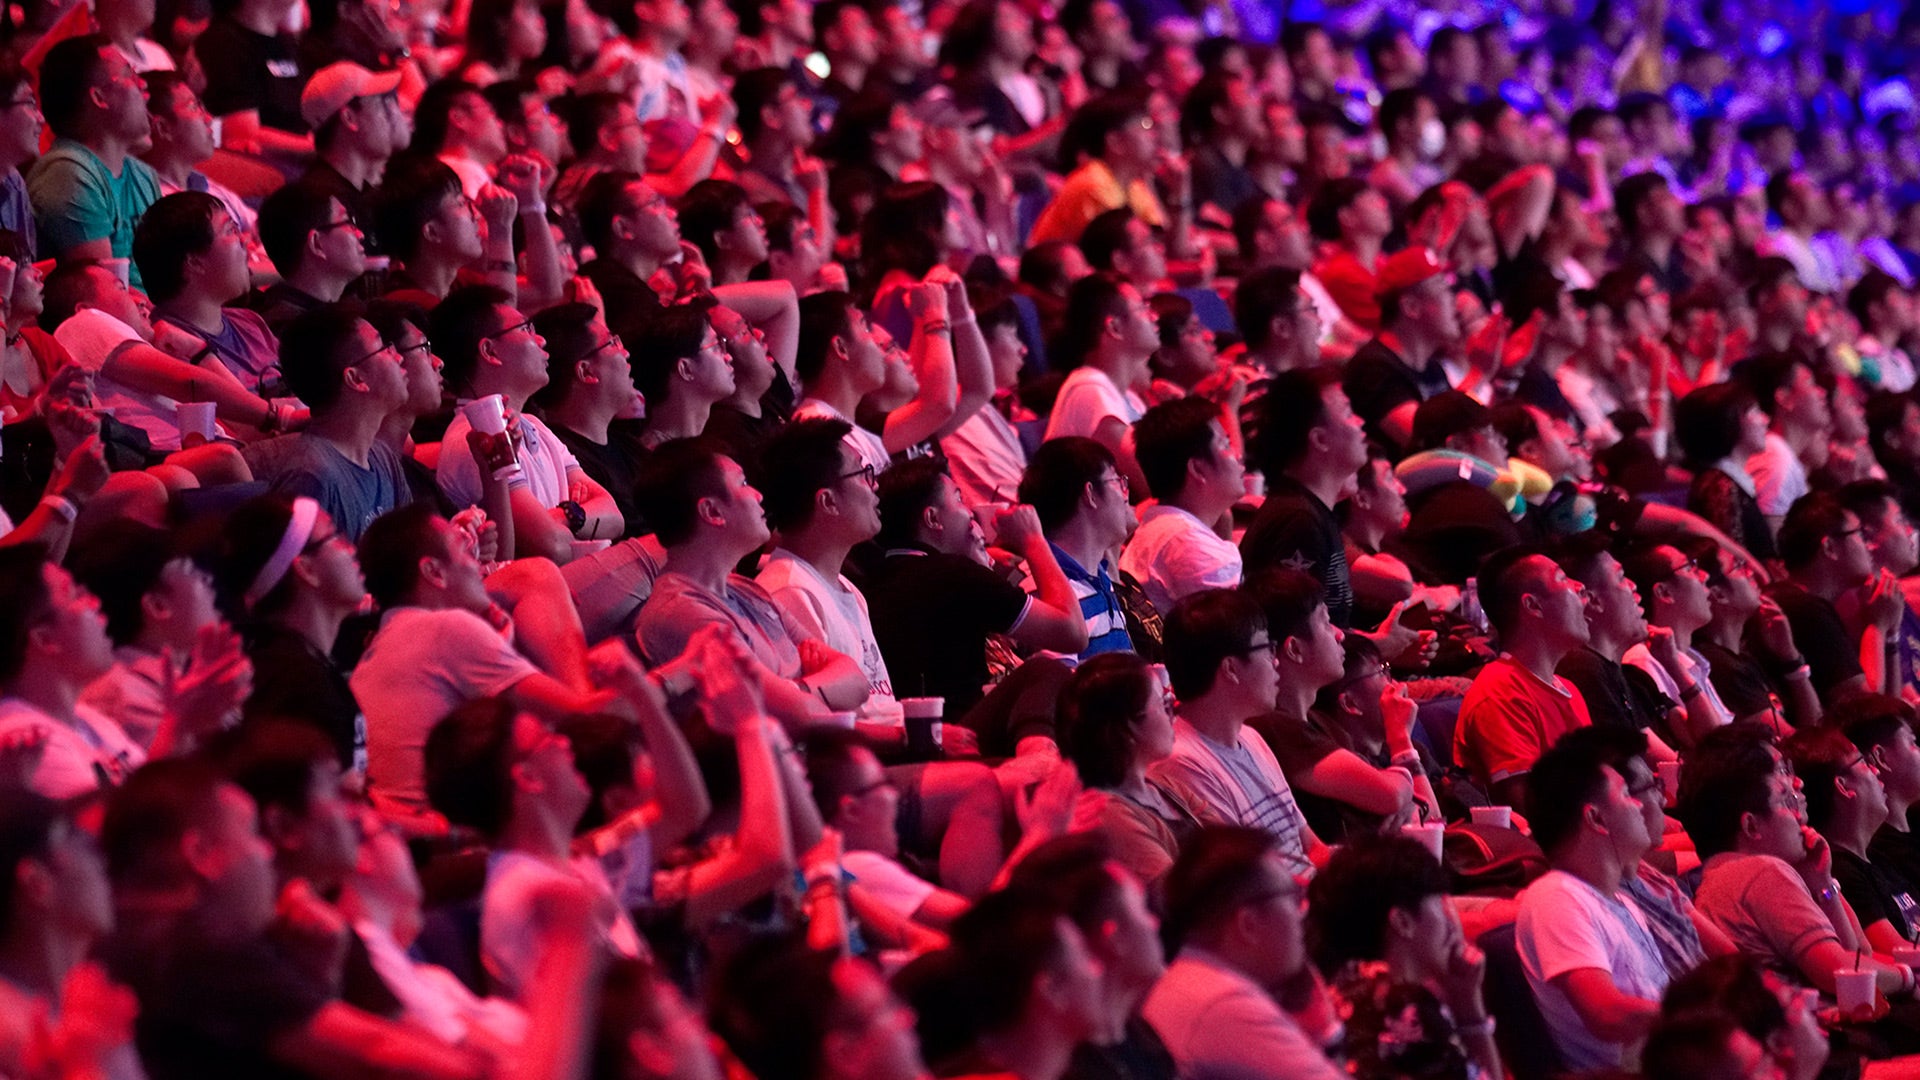 Valve Refunds All DOTA 2 Tourney Tickets Only 12 Days After Selling Them, Event No Longer To Have Live Audience